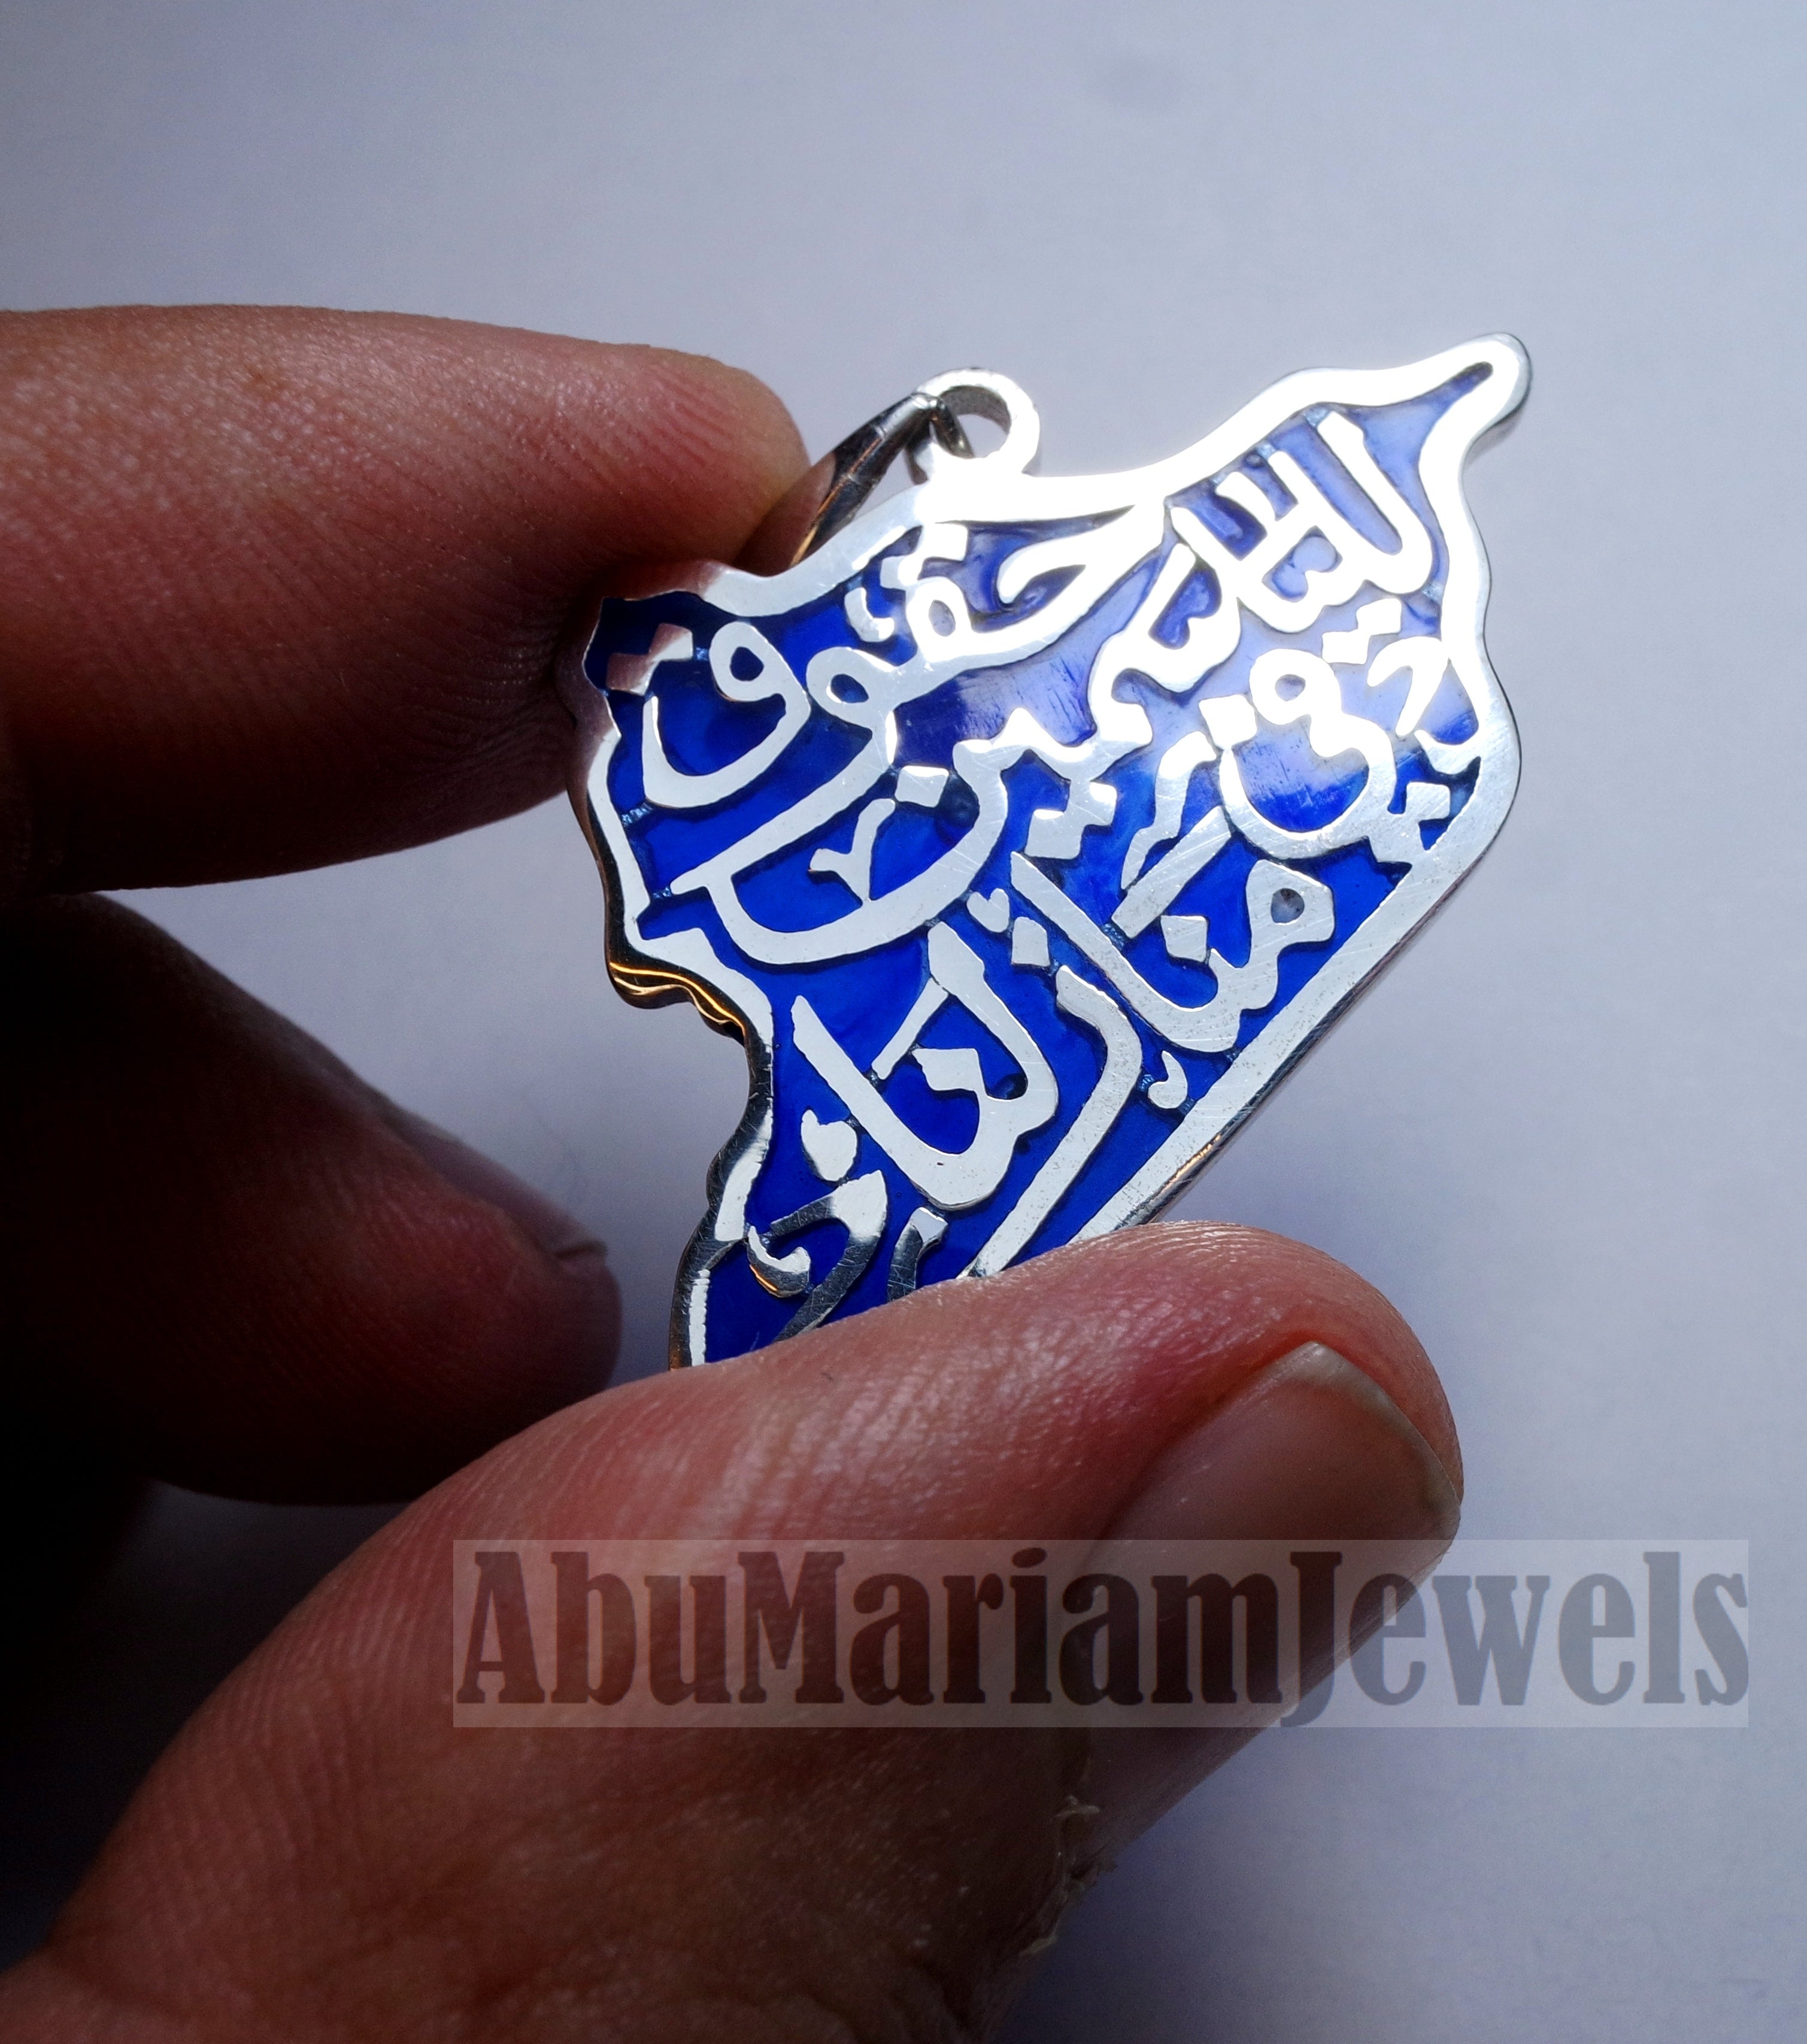 Syria map pendant with famous poem verse sterling silver 925 dark blue enamel مينا high quality jewelry arabic fast shipping خارطه سوريا